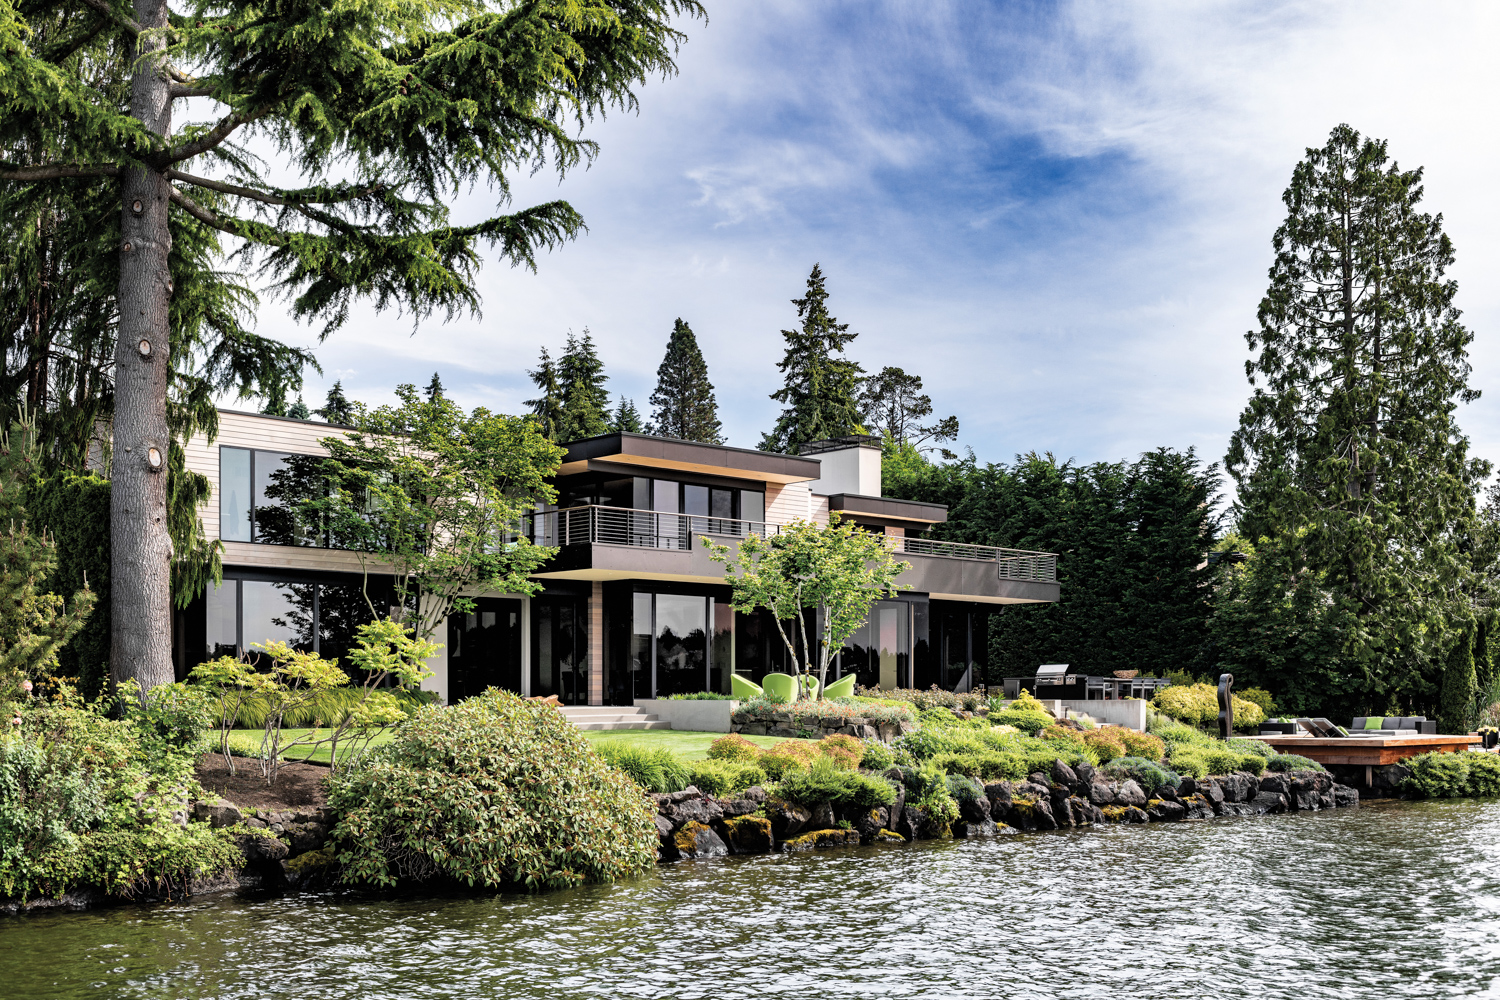 A Mercer Island home perches on the shore by the water.